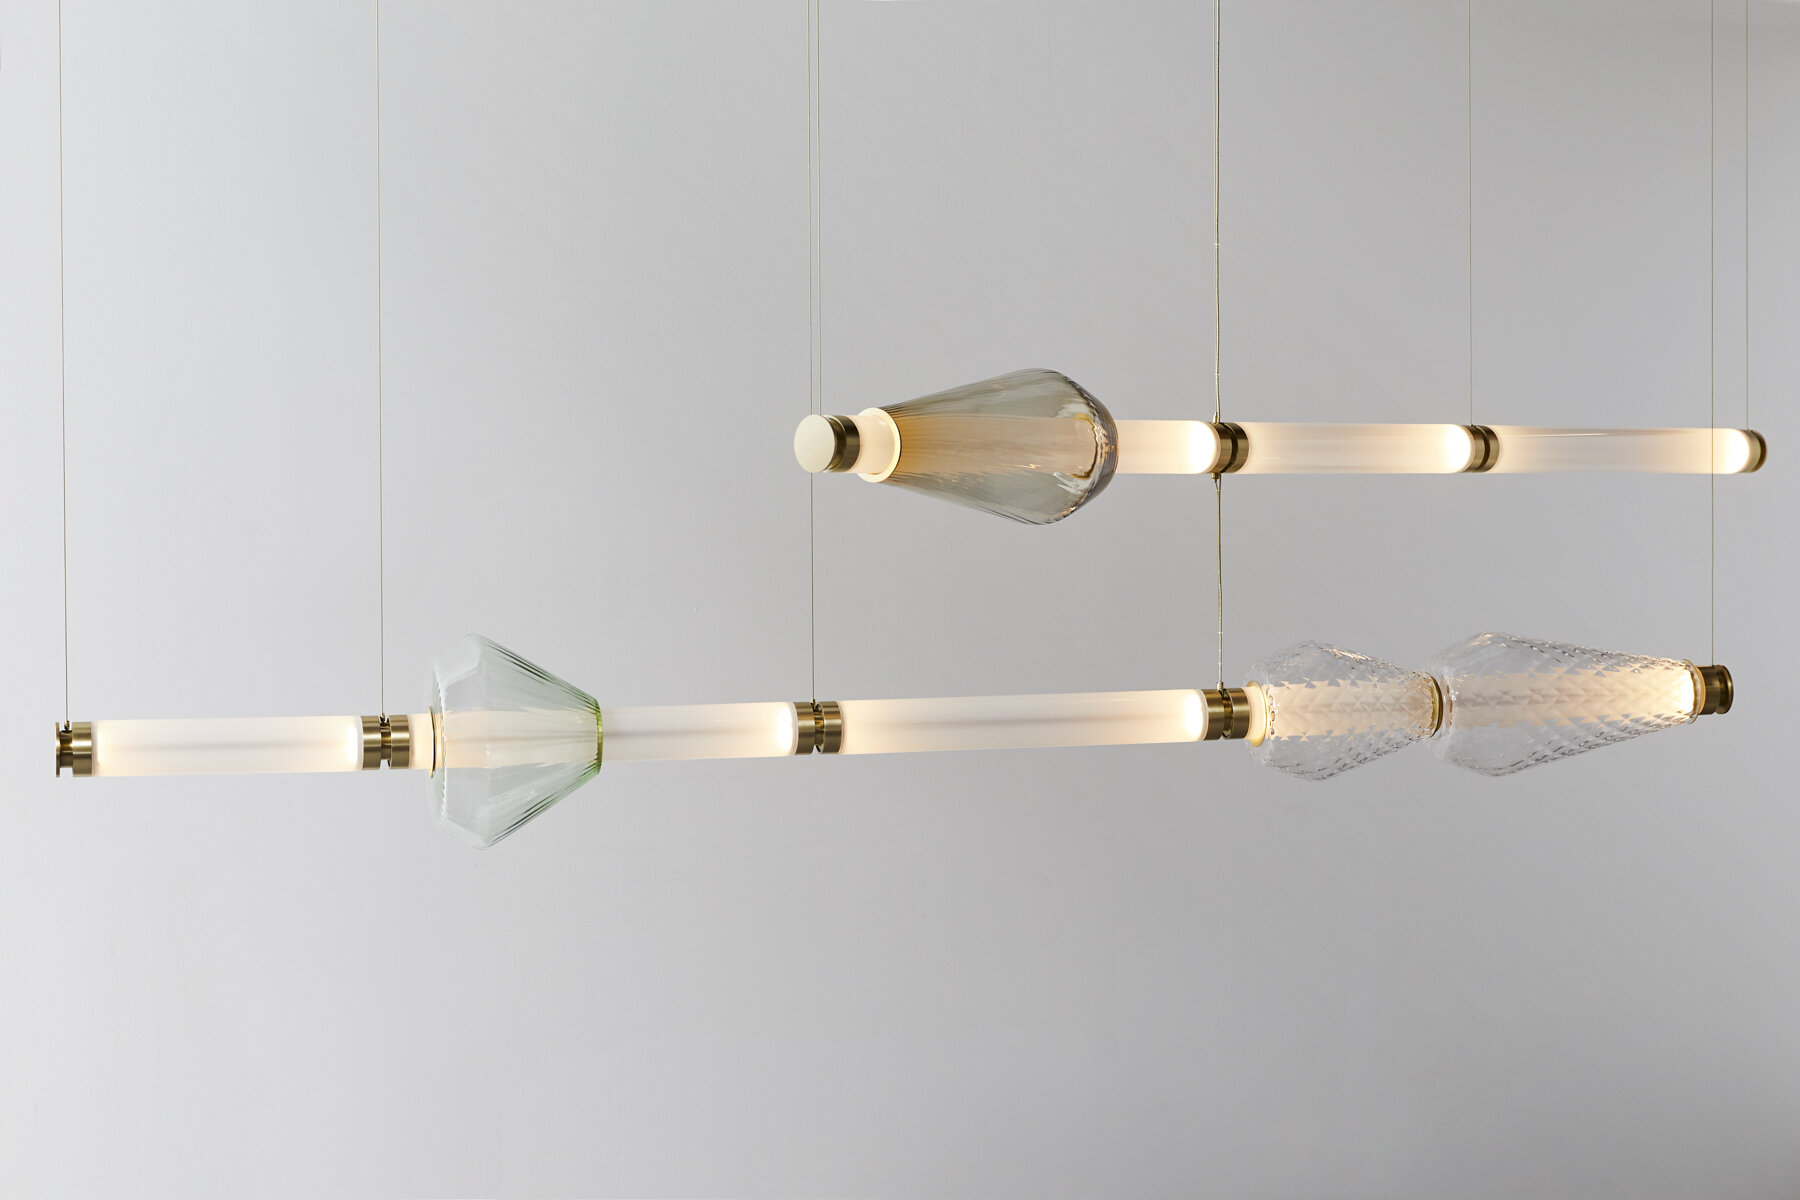 XL 2 TIER CHANDELIER OPTION B - WITH ORION, LYRA + ARAS GLASS BEADS